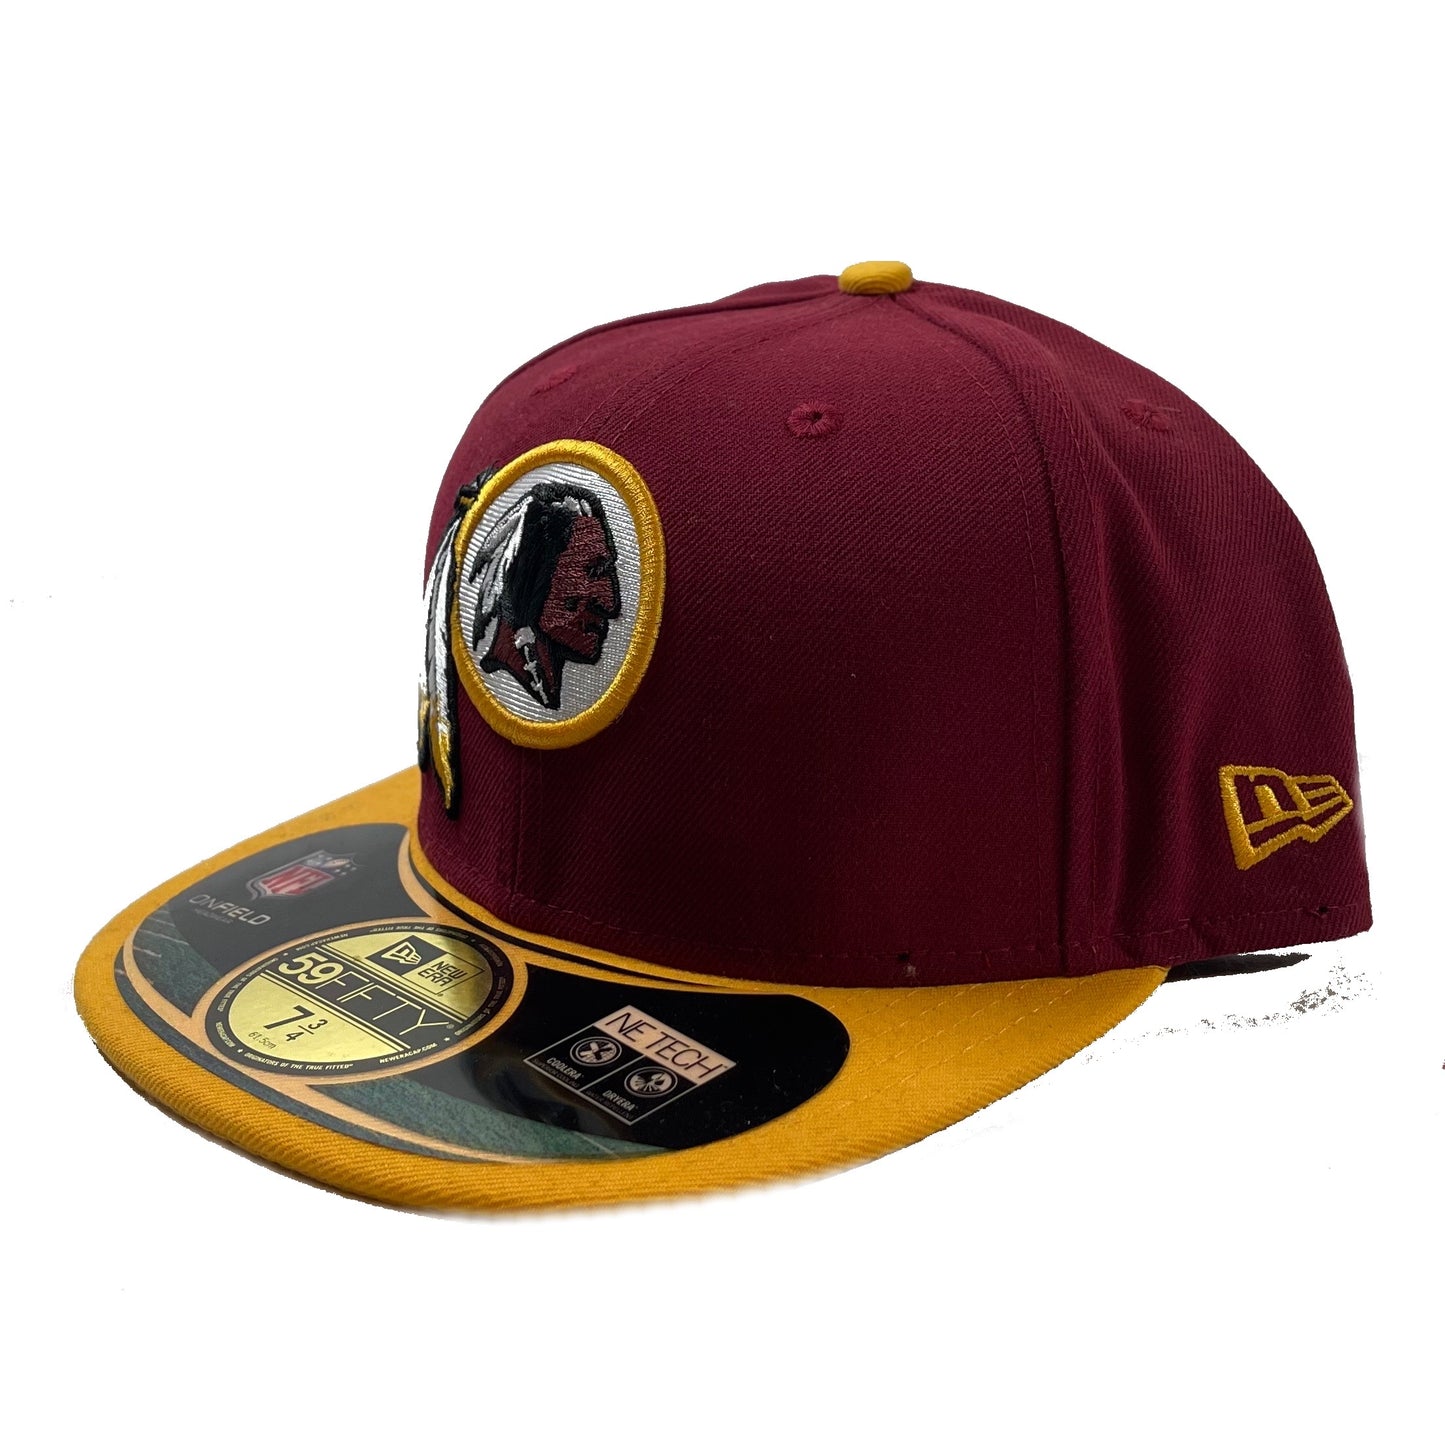 Washington Redskins (Red/Yellow) Fitted